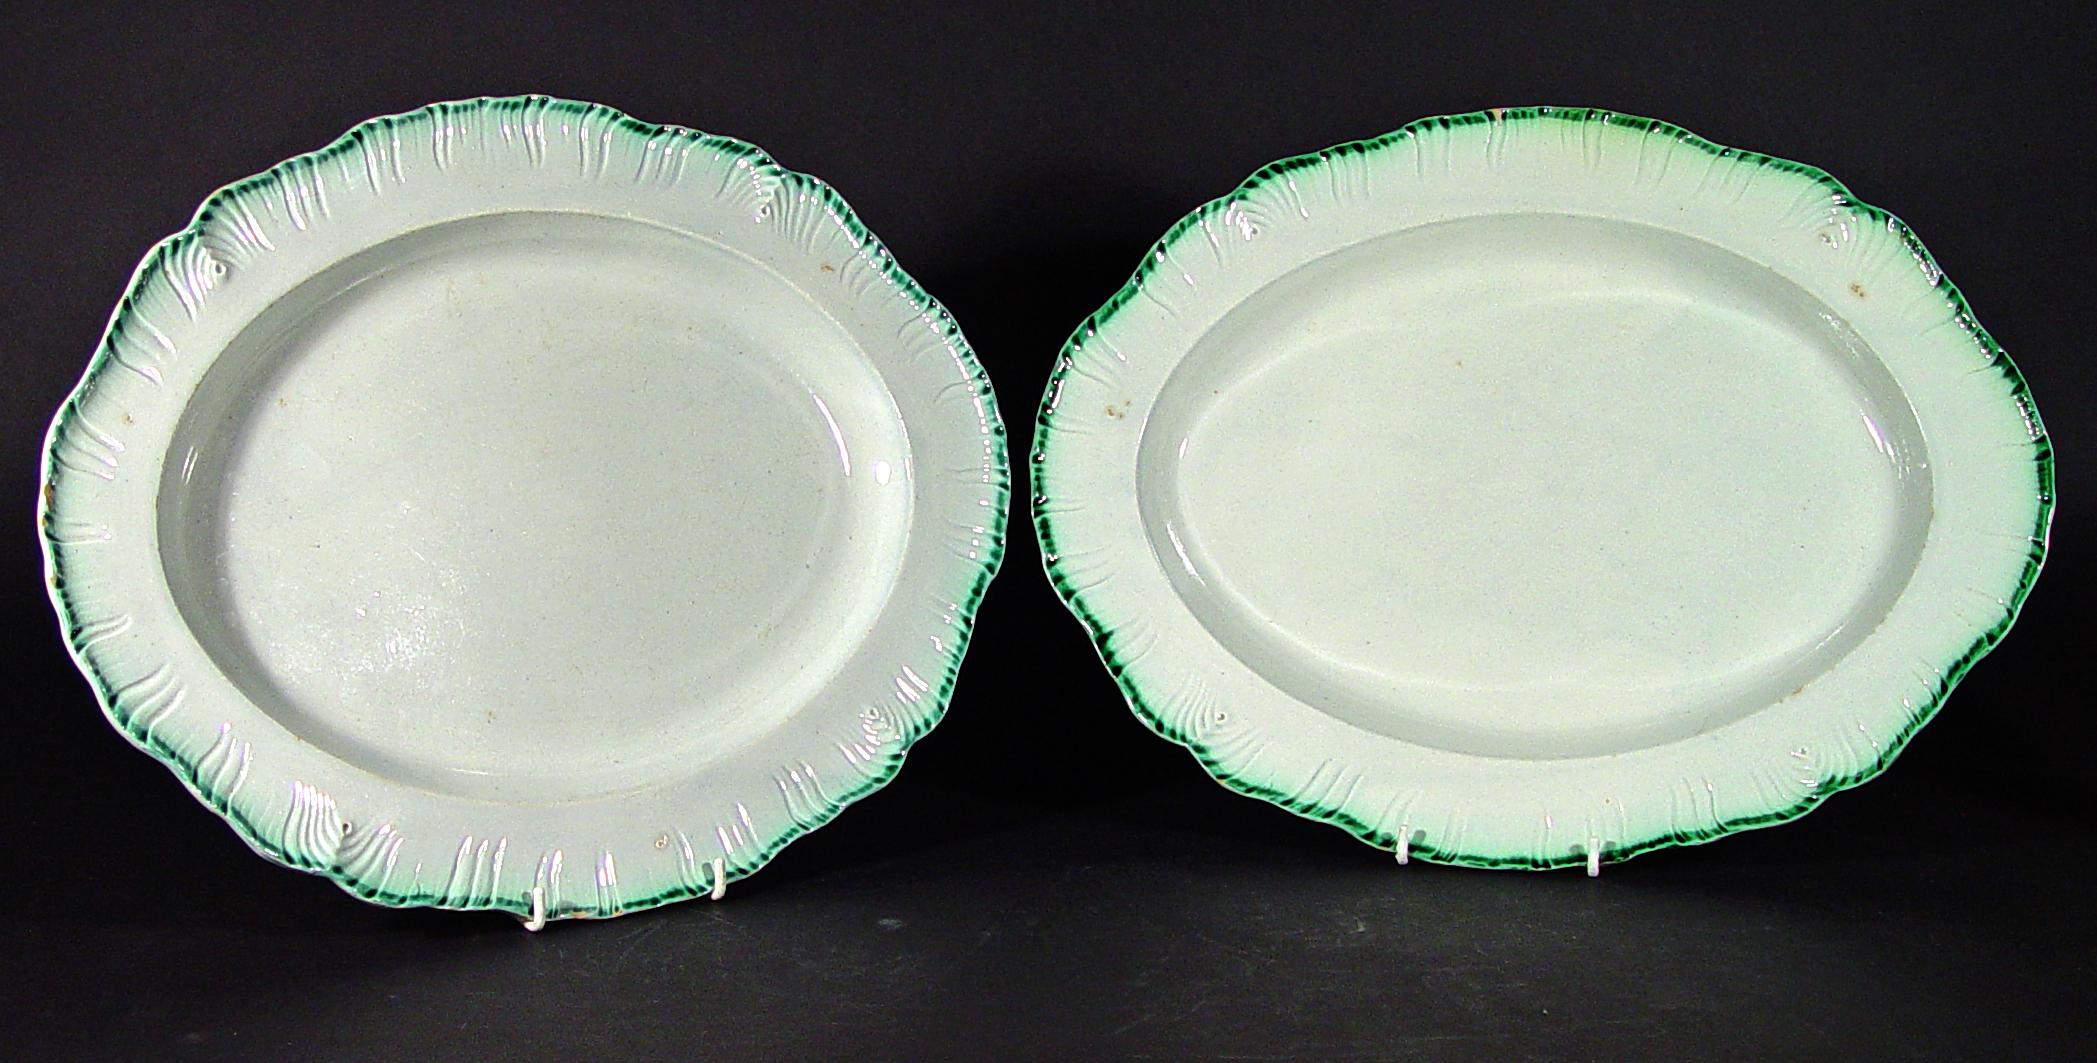 English green shell-edged pearlware pottery dishes, 
Davenport,
circa 1800.

The large oval Davenport dishes are molded with a feathered shell-edge in green glaze.

Dimensions: 16 3/4 inches x 13 inches.